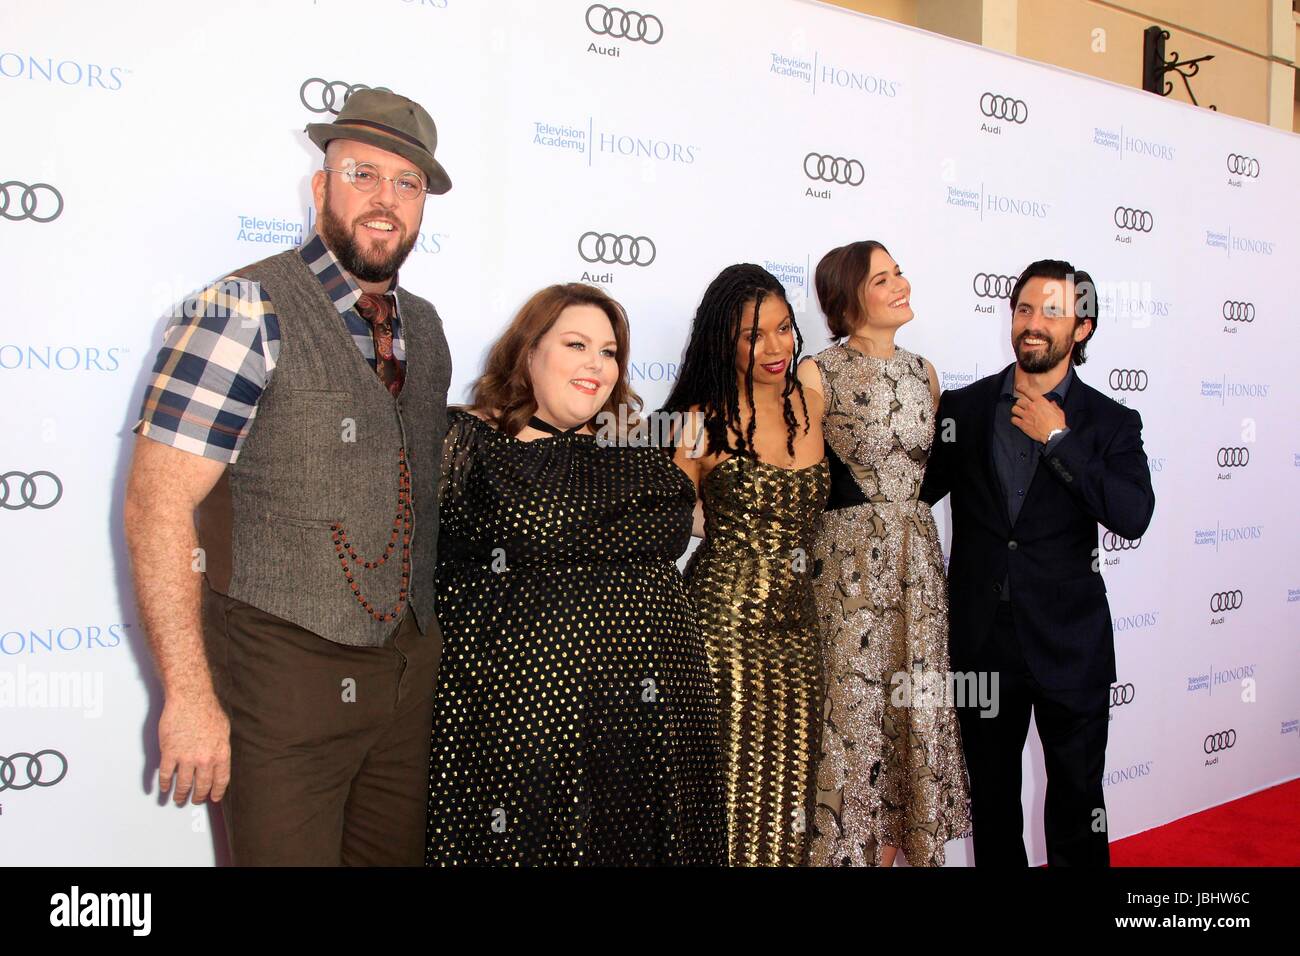 Beverly Hills, CA. 8th June, 2017. Chris Sullivan, Chrissy Metz, Susan Kelechi Watson, Mandy Moore, Milo Ventimiglia at arrivals for 10th Annual Television Academy Honors, Montage Hotel, Beverly Hills, CA June 8, 2017. Credit: Priscilla Grant/Everett Collection/Alamy Live News Stock Photo